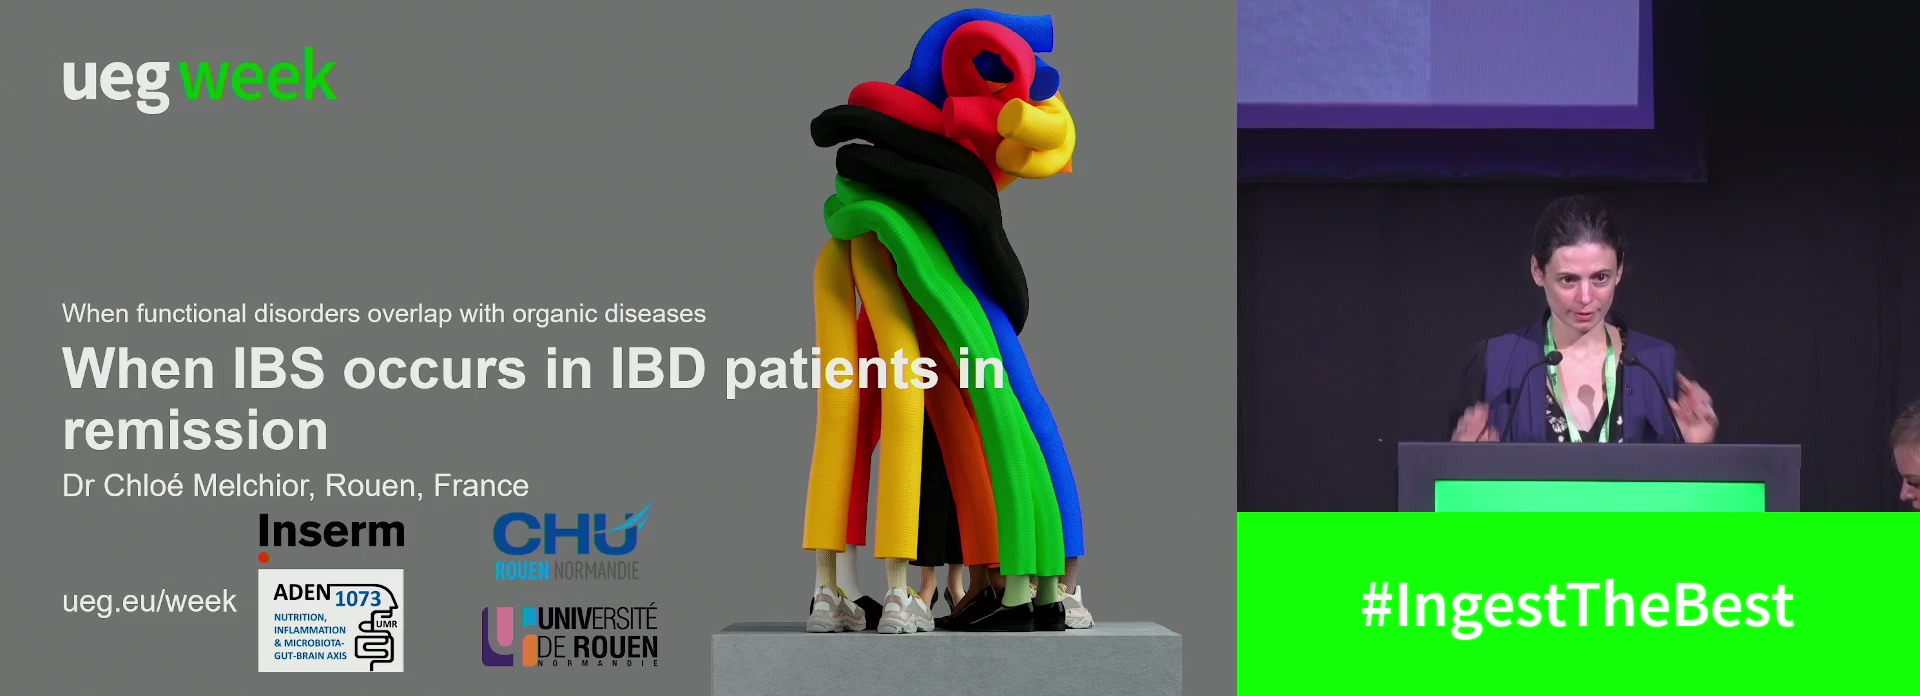 When IBS occurs in IBD patients in remission